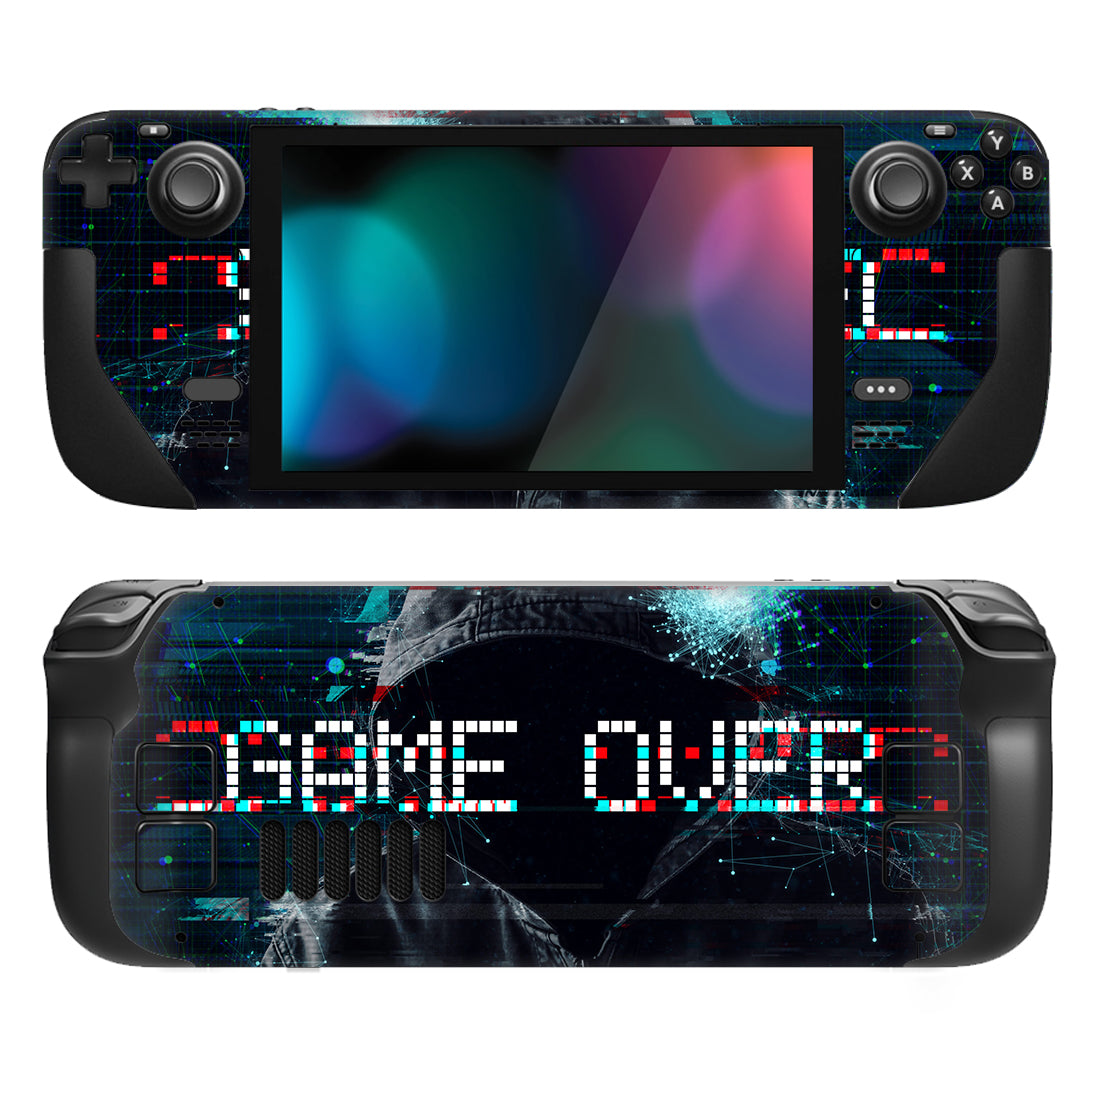 PlayVital Full Set Protective Skin Decal for Steam Deck, Custom Stickers Vinyl Cover for Steam Deck Handheld Gaming PC - Game Over Hacker - SDTM043 playvital